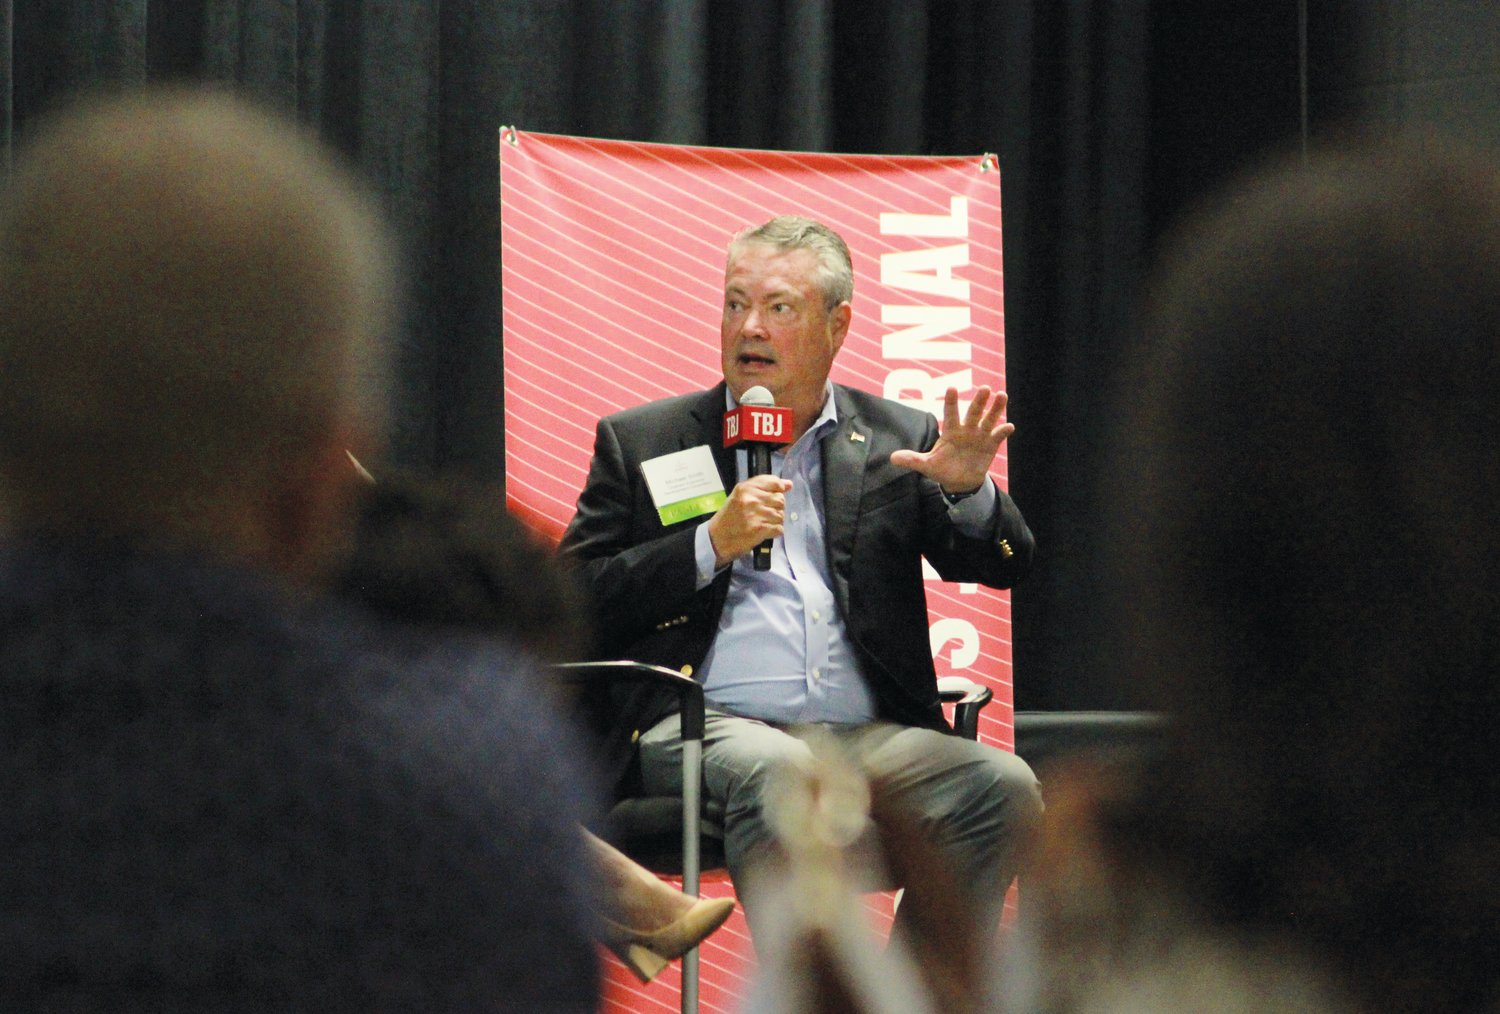 Michael Smith, the president of the Chatham Economic Development Corporation, speaks to the audience during the 'Corridors of Opportunity' panel last Thursday at the Chatham County Agriculture & Conference Center in Pittsboro.